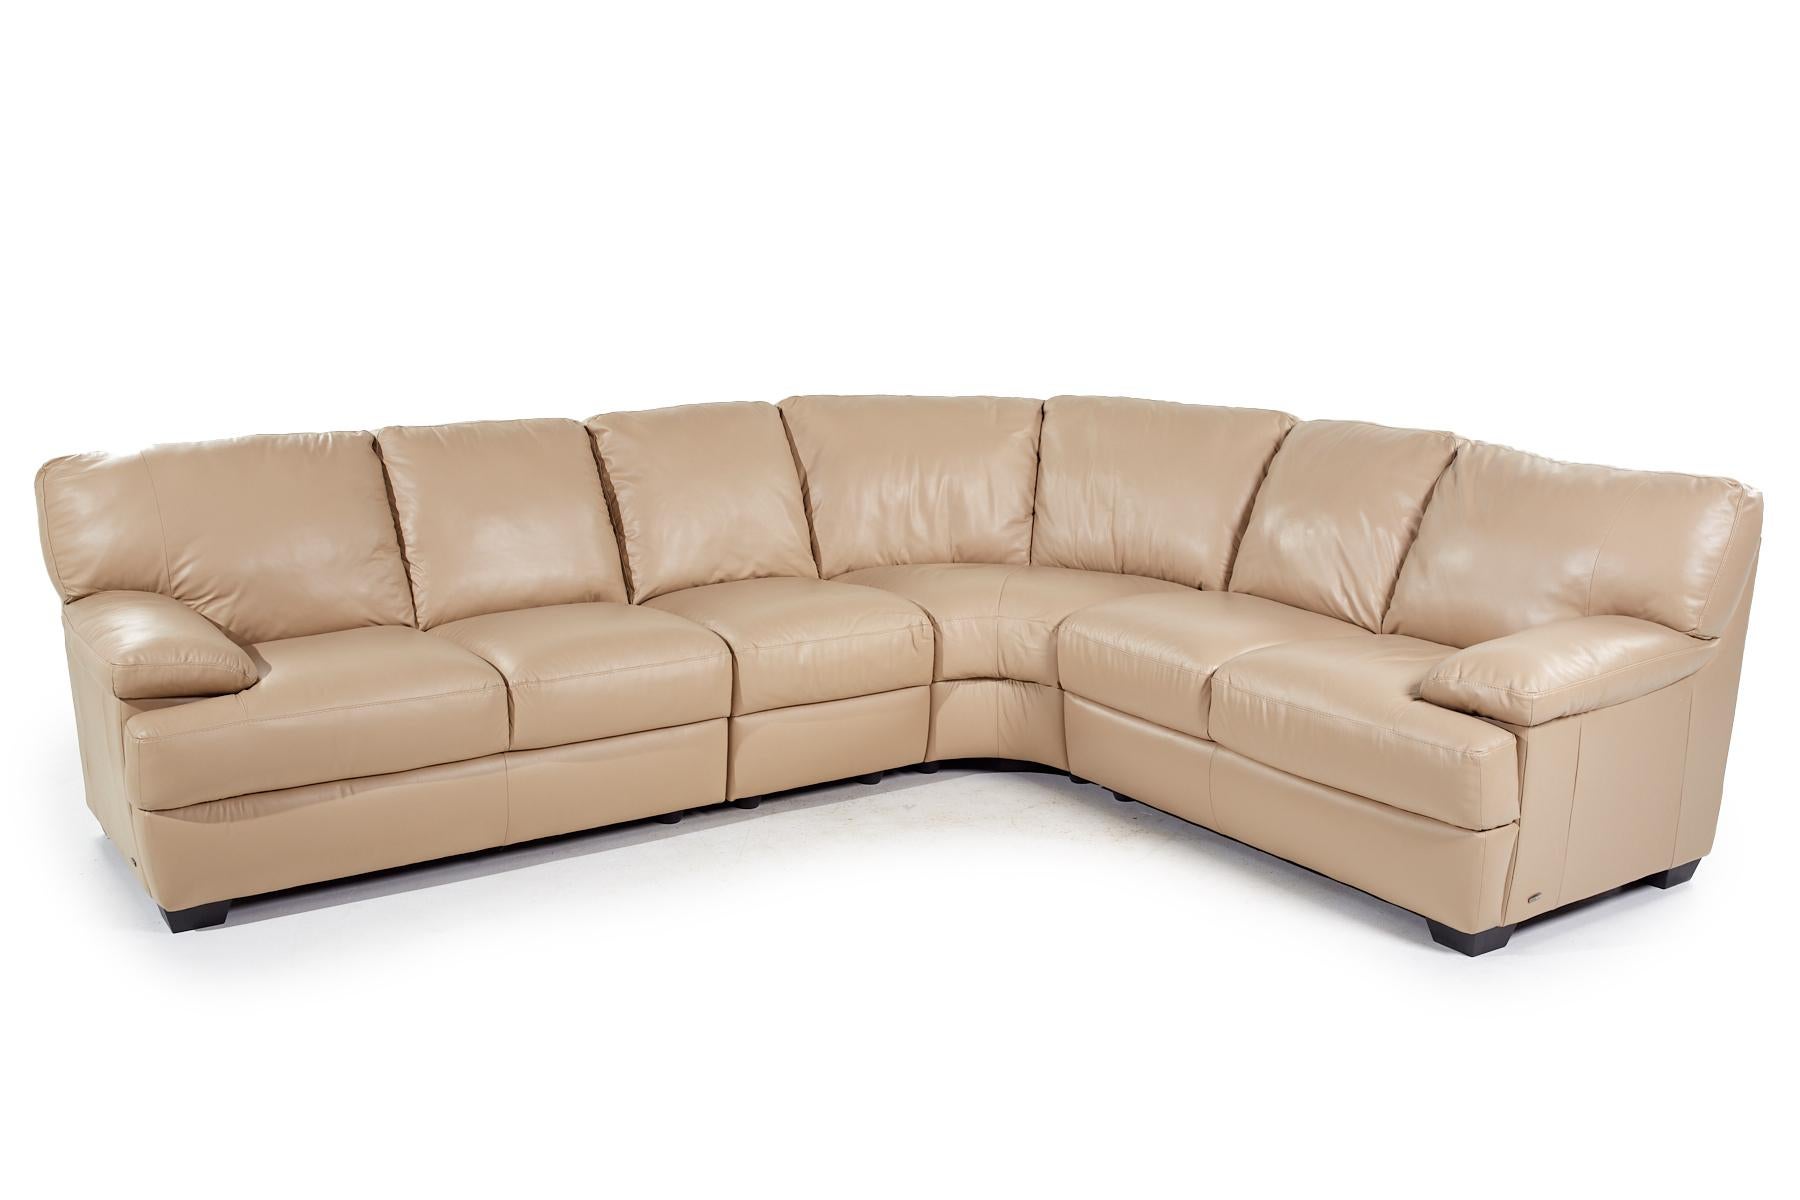 natuzzi leather sectional couch